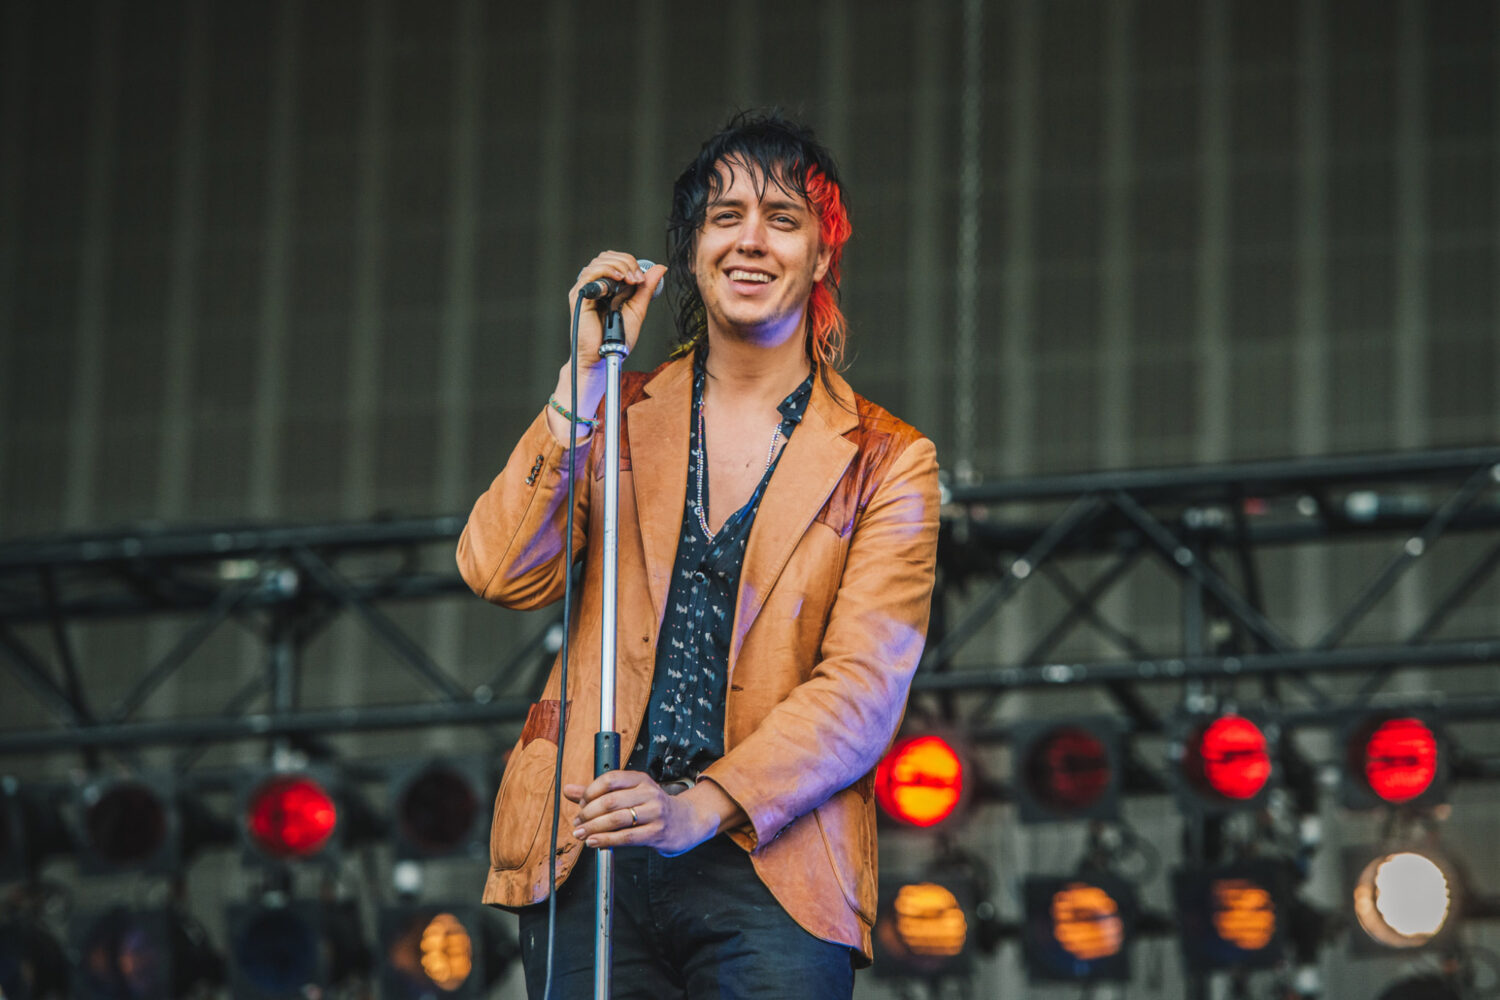 There's new music from The Strokes coming today! News DIY Magazine